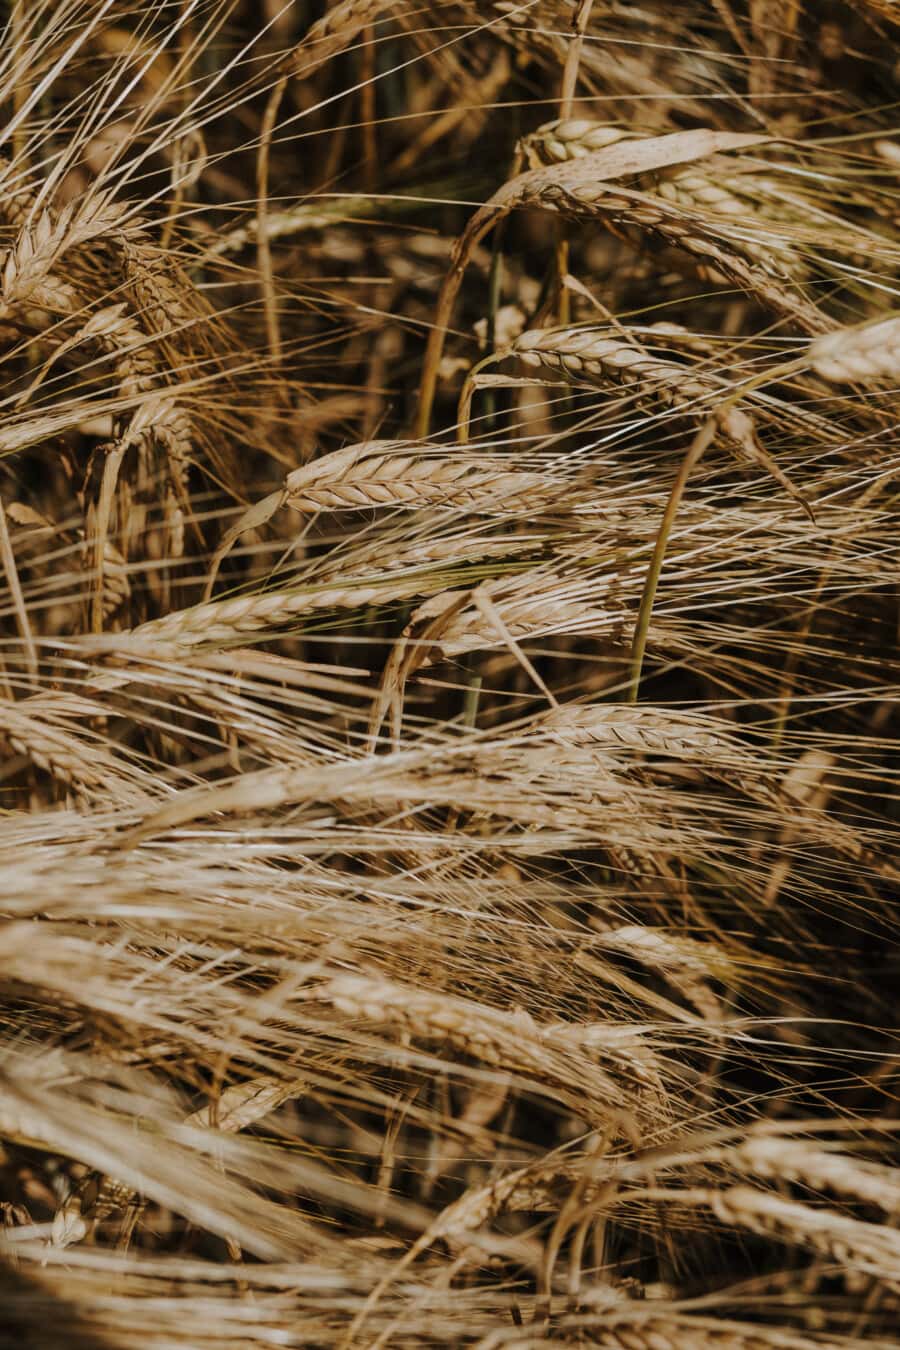 dry, wheatfield, seed, wheat, straw, cereal, agriculture, nature, farmland, farming